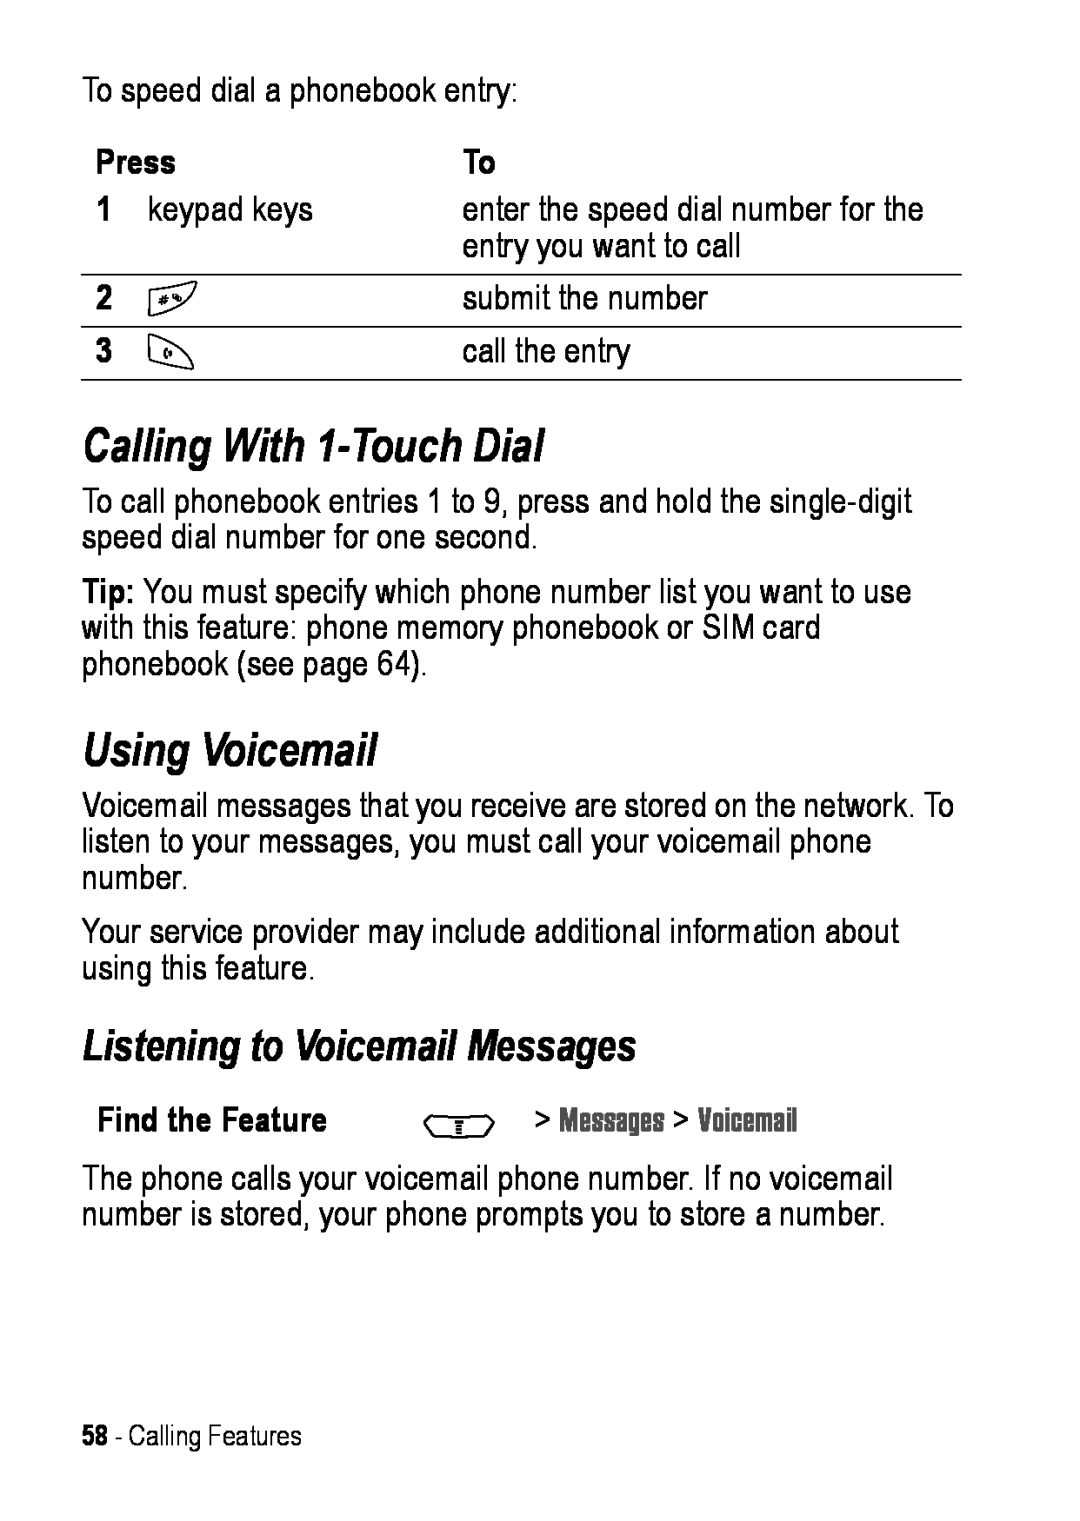 Motorola C390 manual Calling With 1-Touch Dial, Using Voicemail, Listening to Voicemail Messages 